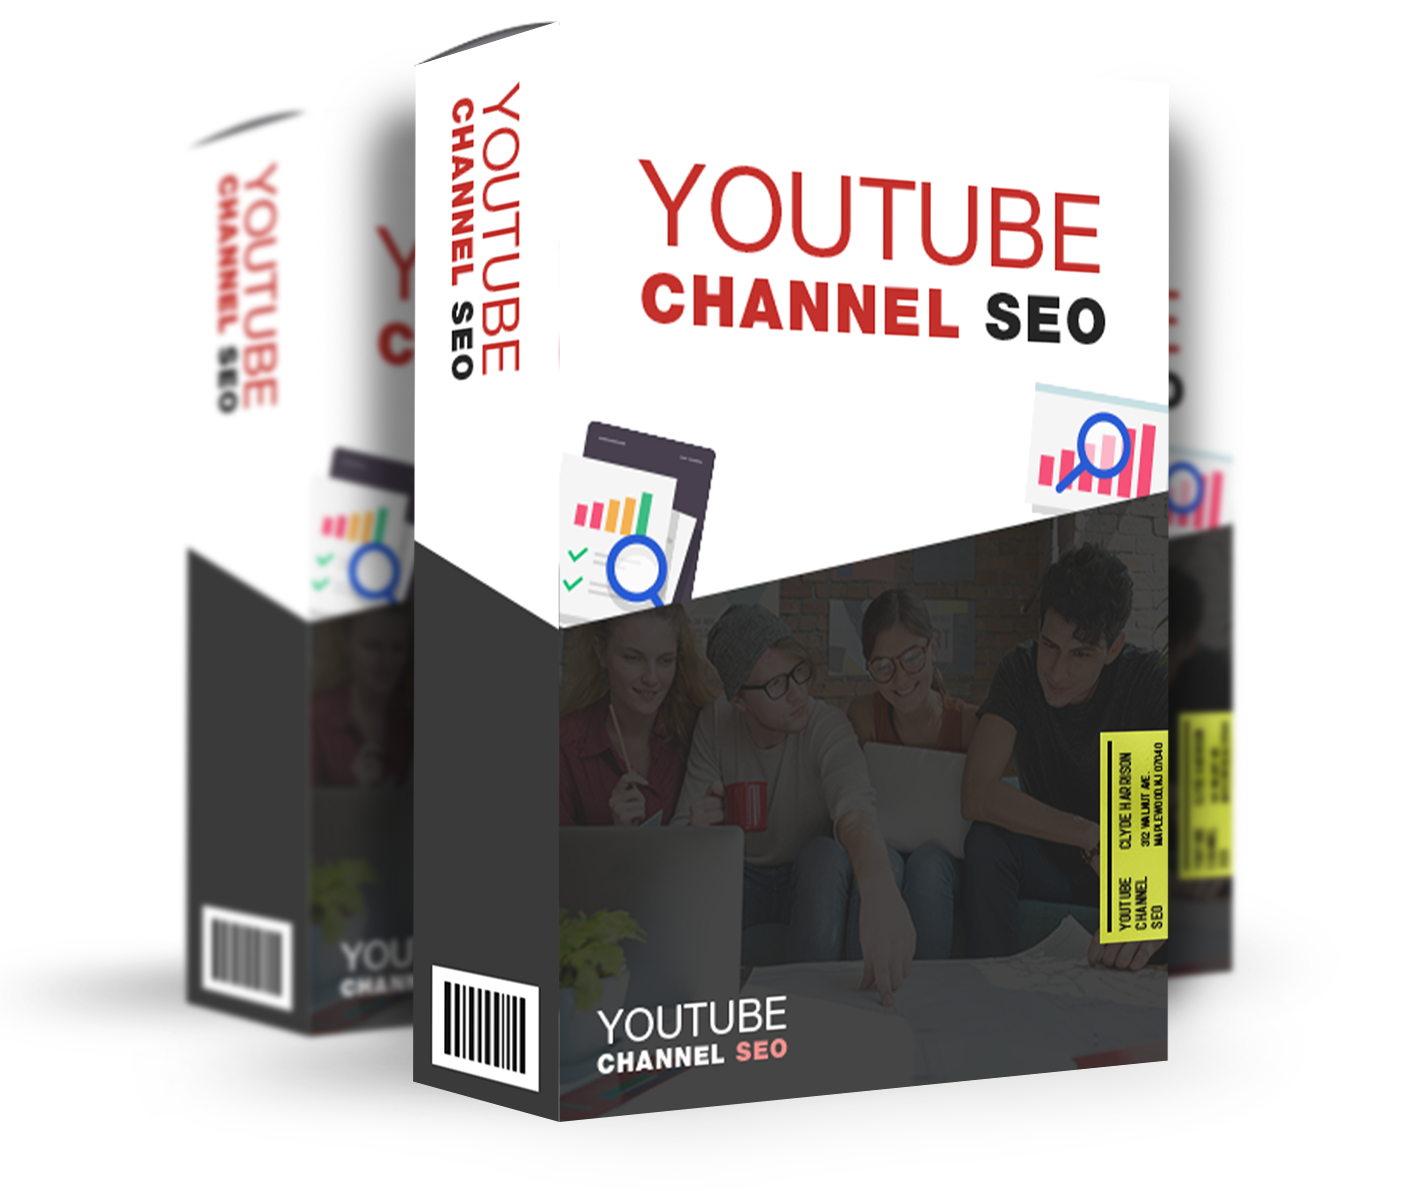 YouTube Channel SEO cover mockup